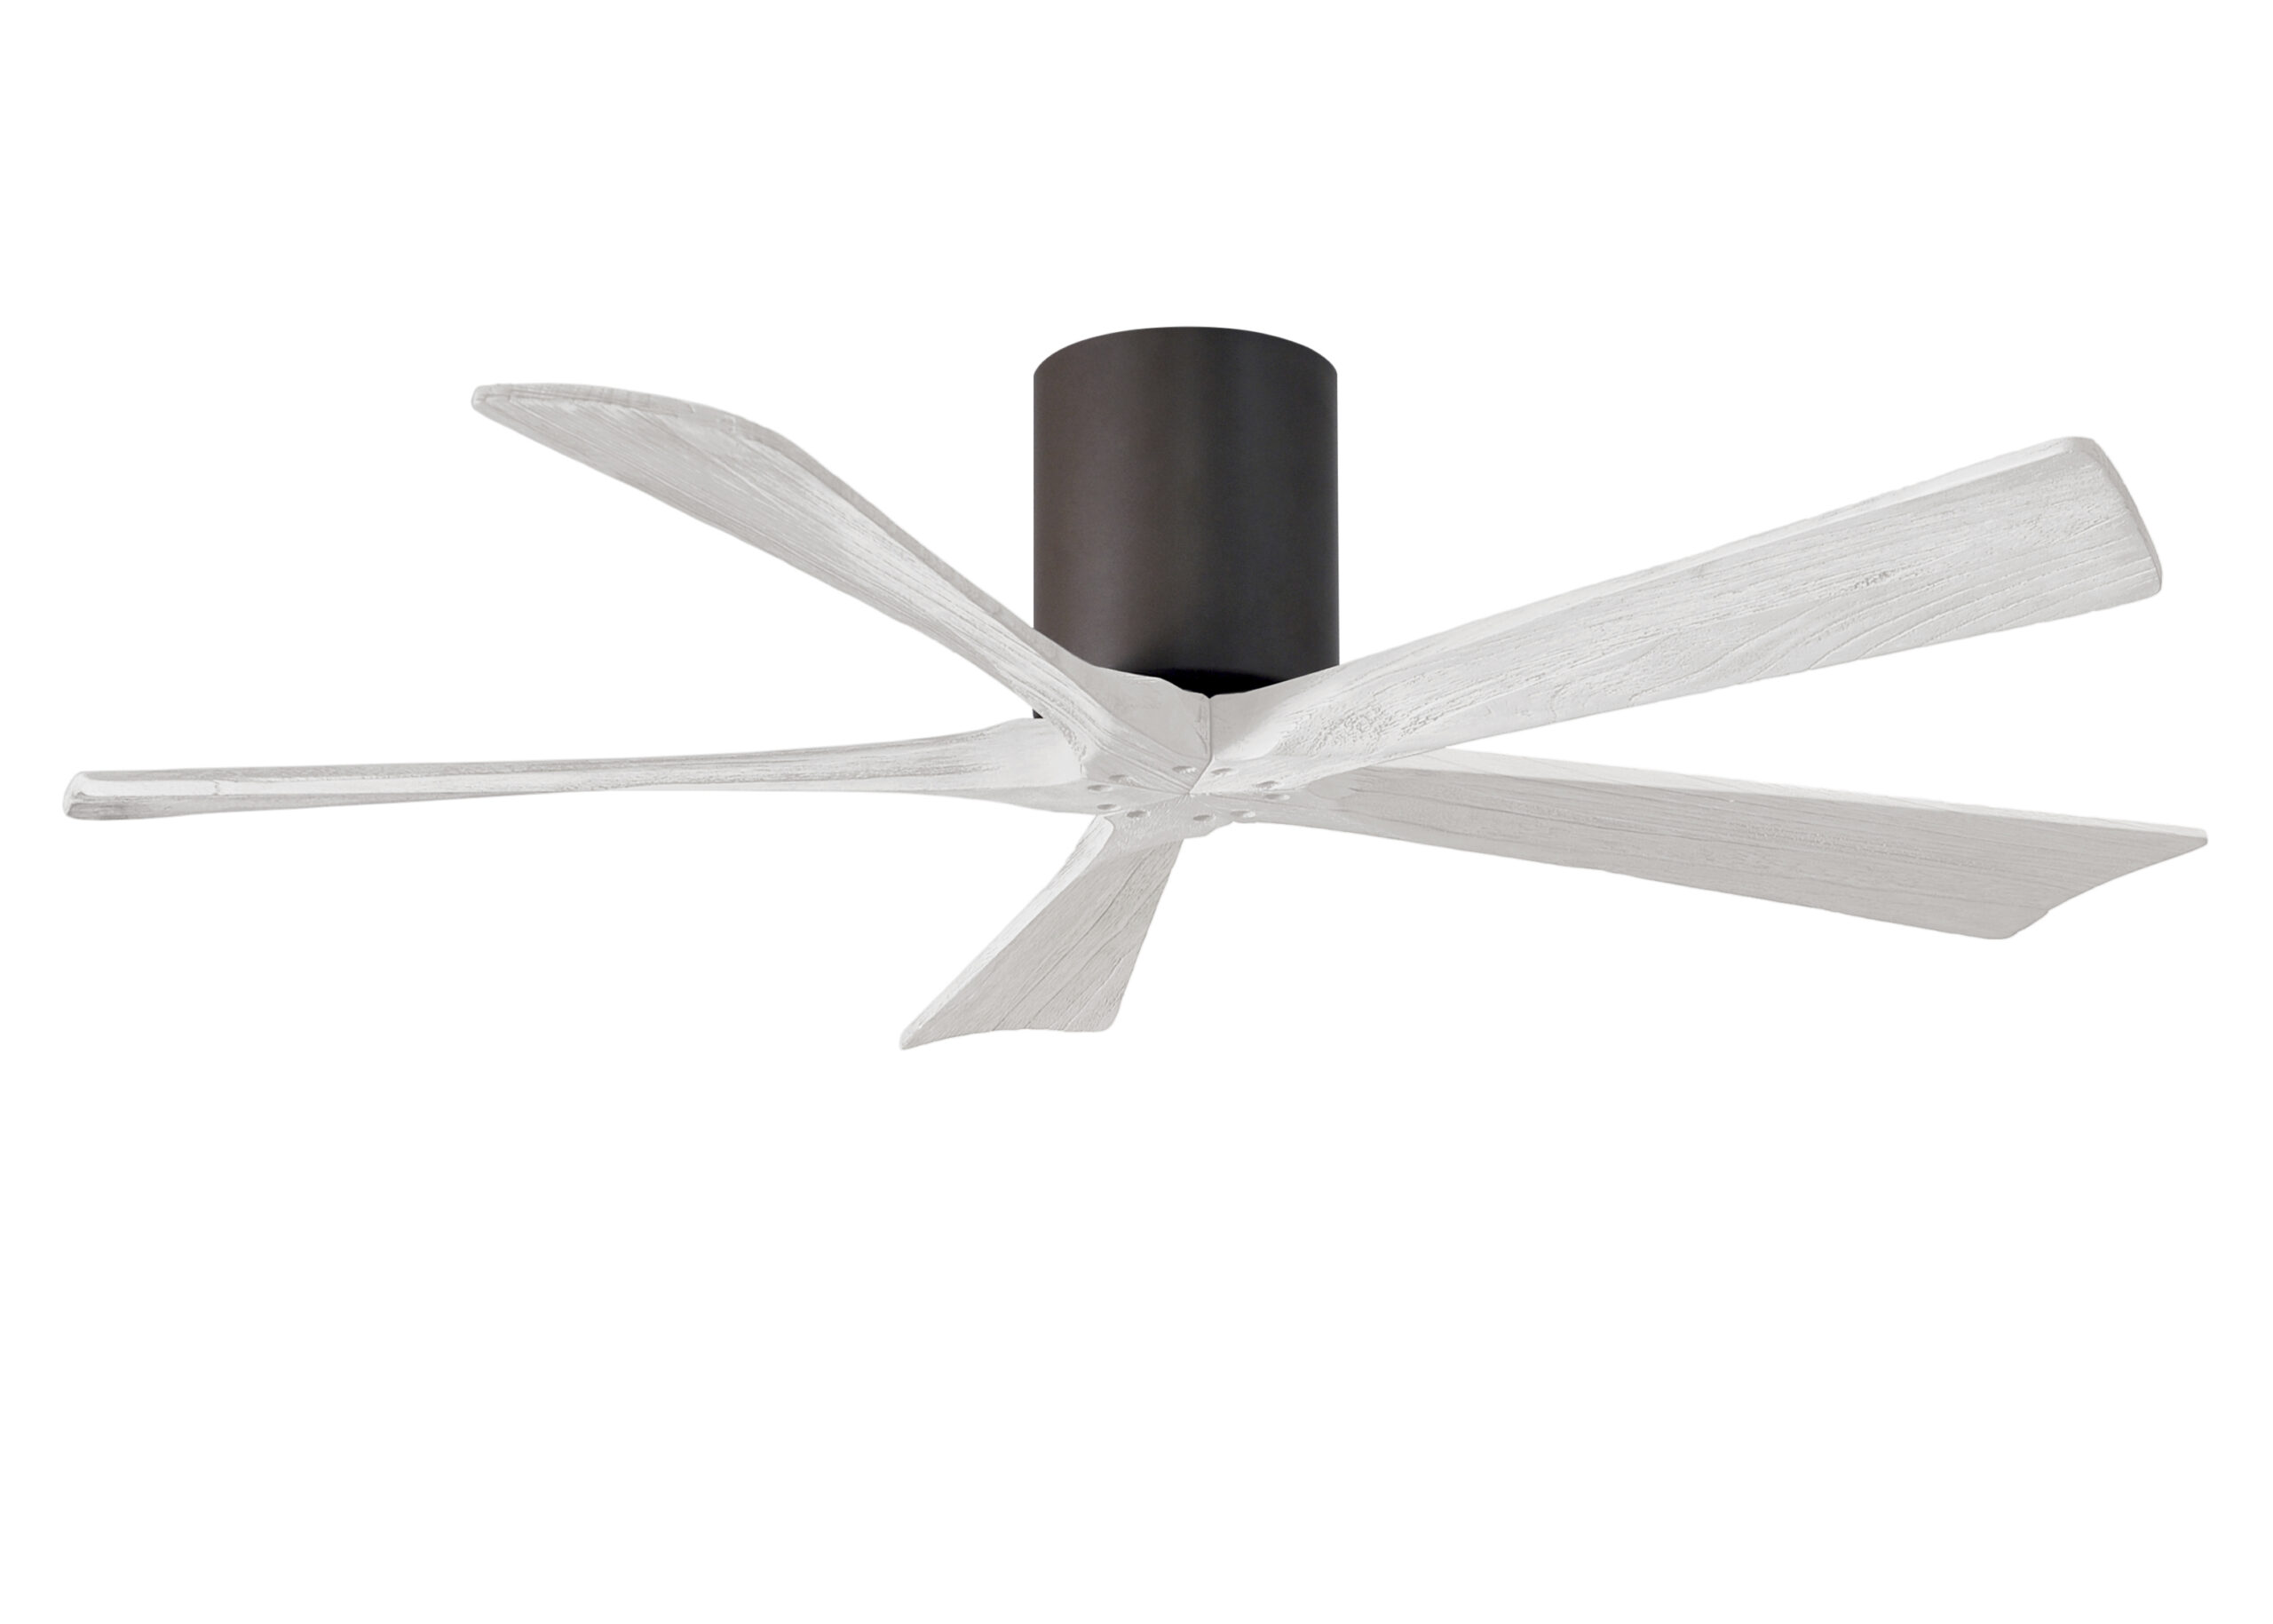 Irene-5H Ceiling Fan in Textured Bronze Finish with 52